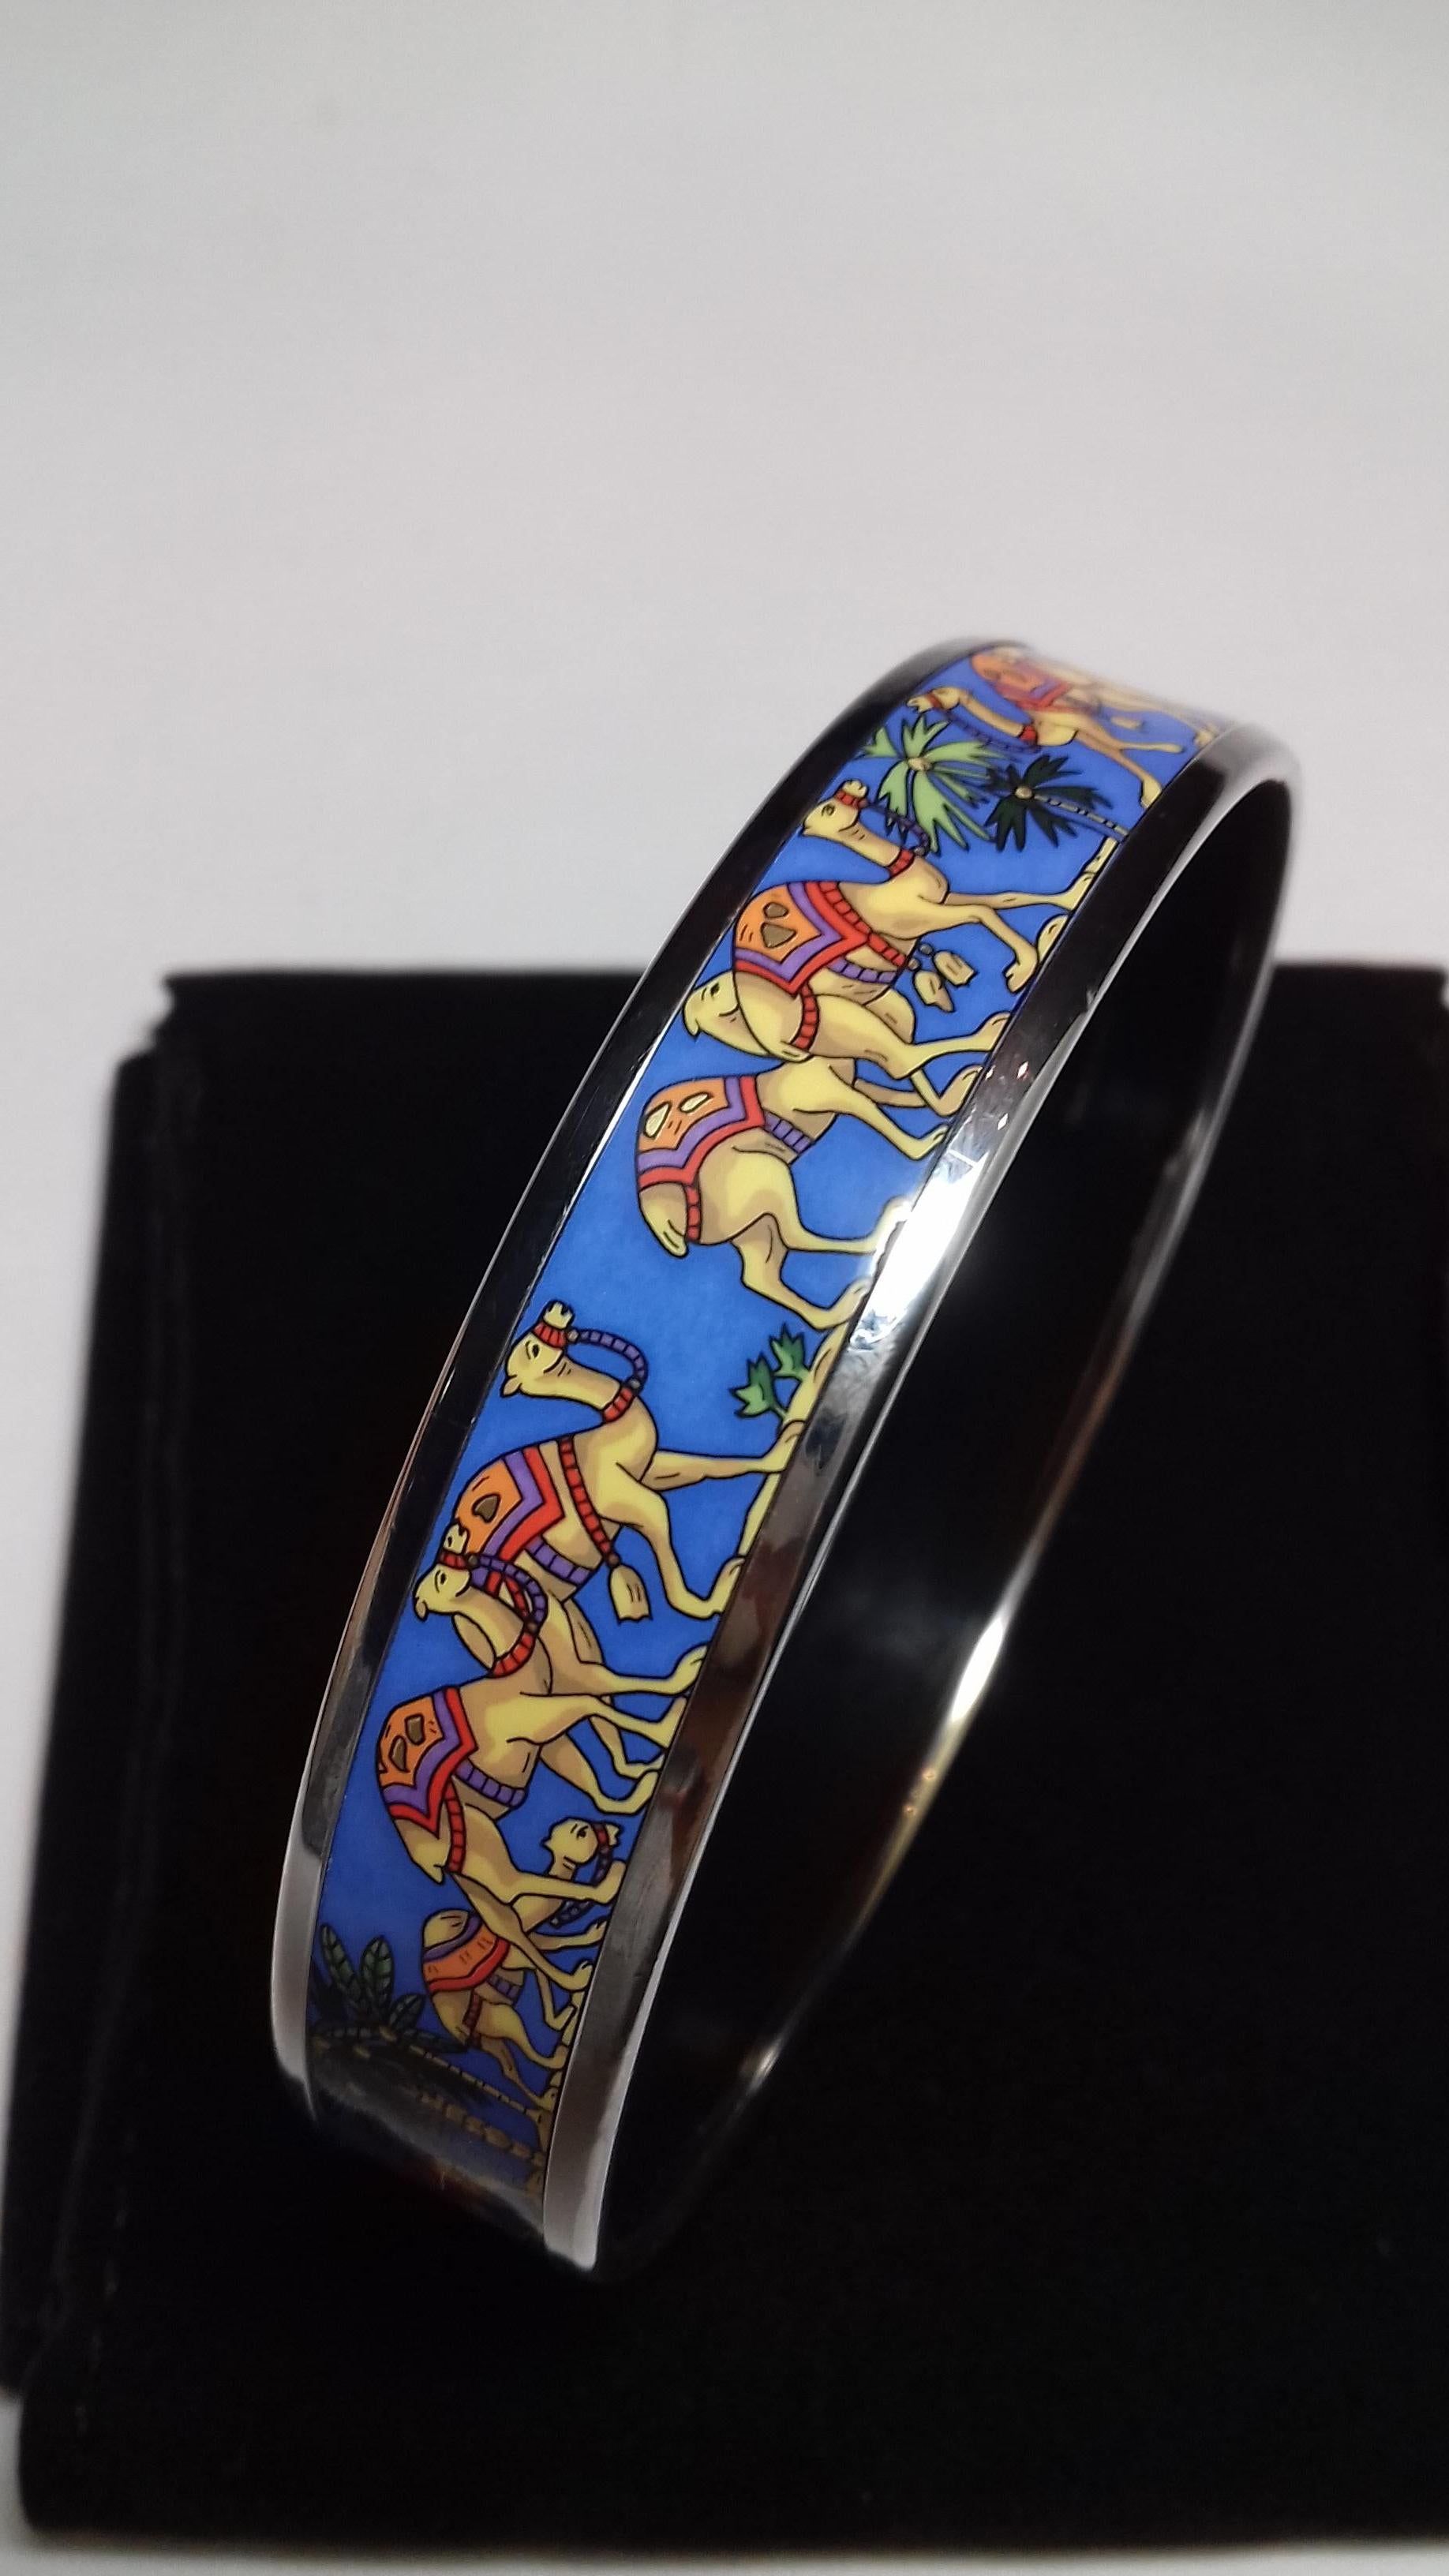 Beautiful and RARE Authentic Hermès Bracelet

Pattern: Chameaux et Palmiers (Camels and Palm Trees)

Hard to find !

Made in Austria + E

Made of printed Enamel and Palladium Plated Hardware

Colorways: Bleu, Beige, Green, Silver-Tone rims

